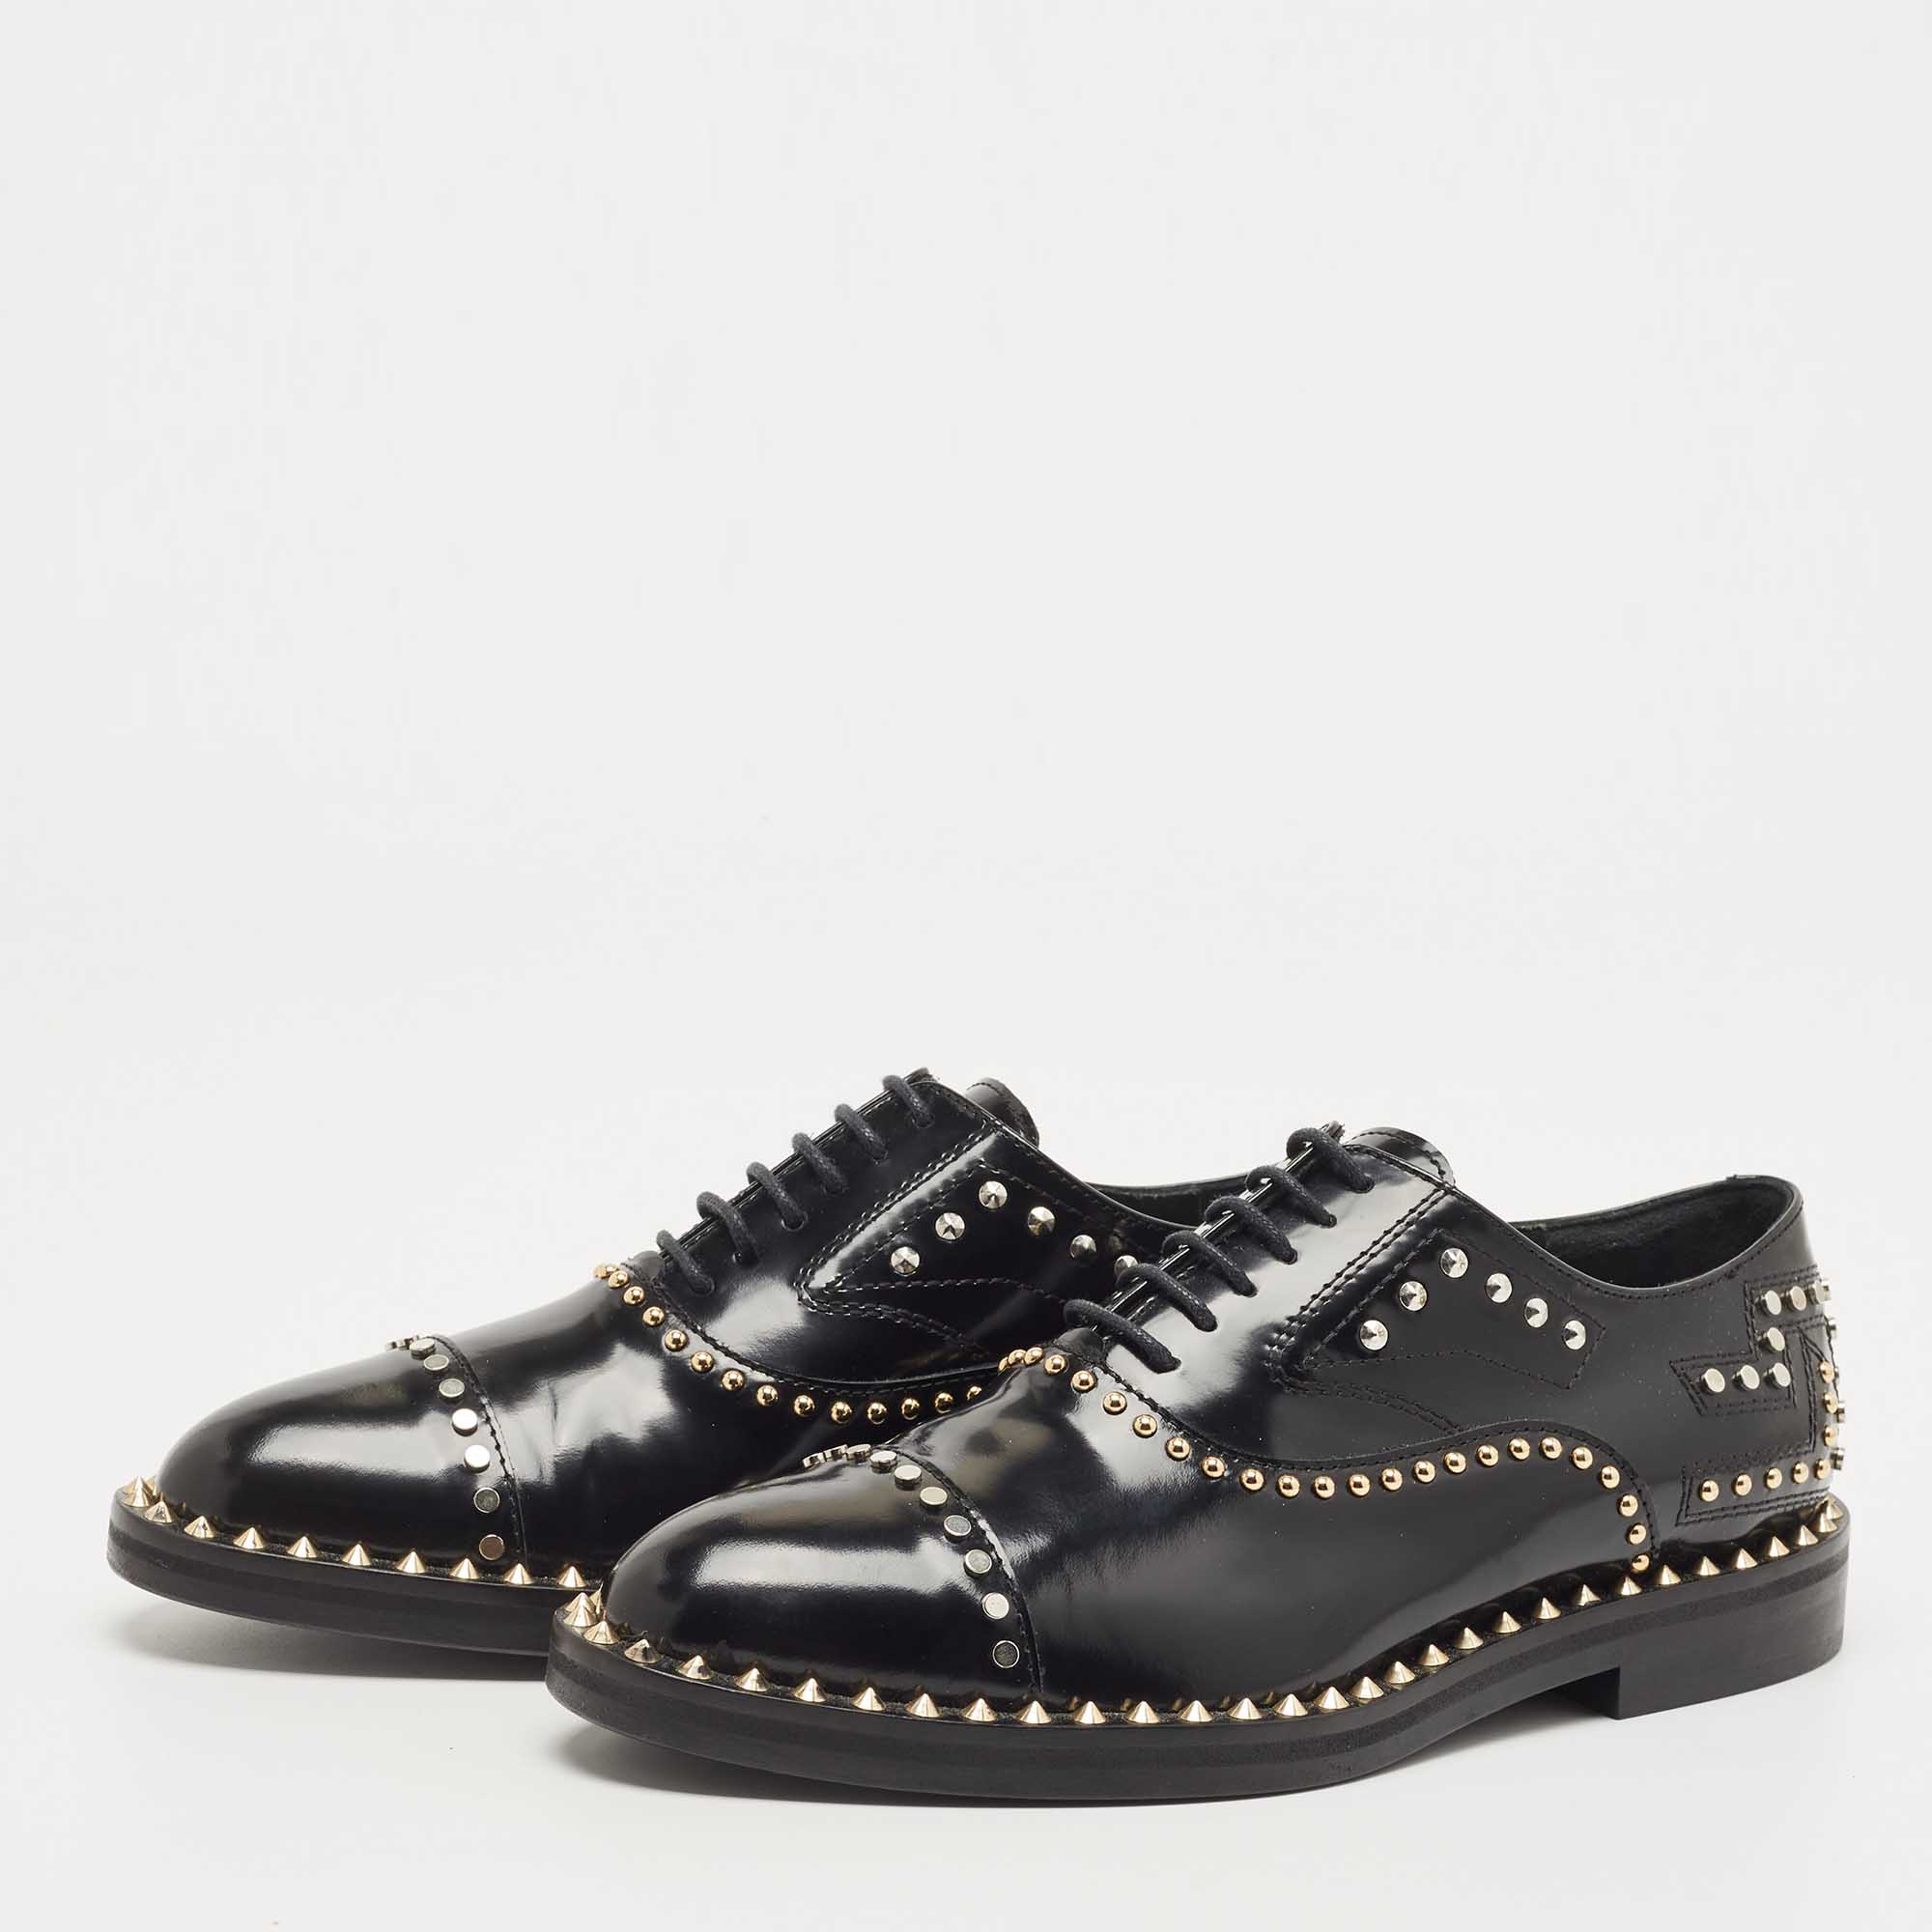 

Zadig & Voltaire Black Leather Studded Youth Clous Oxfords Size